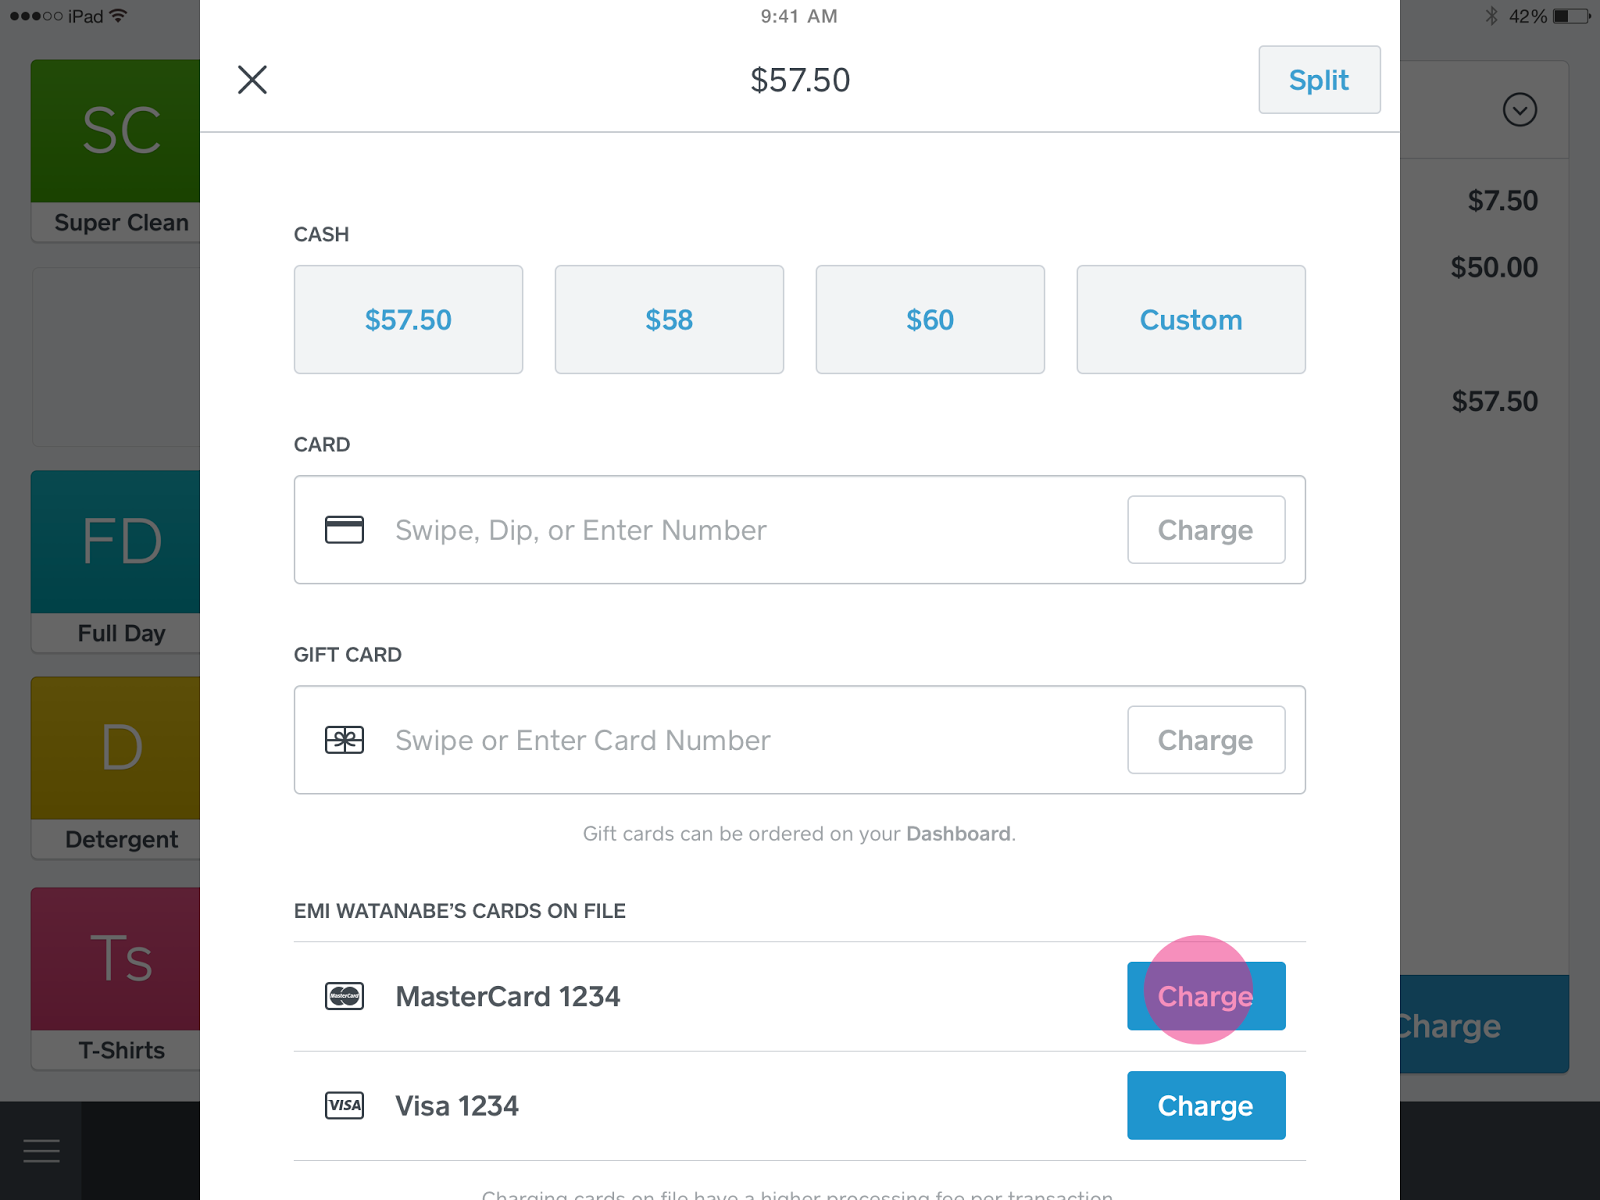 Card on file helps speed up the checkout process with returning customers